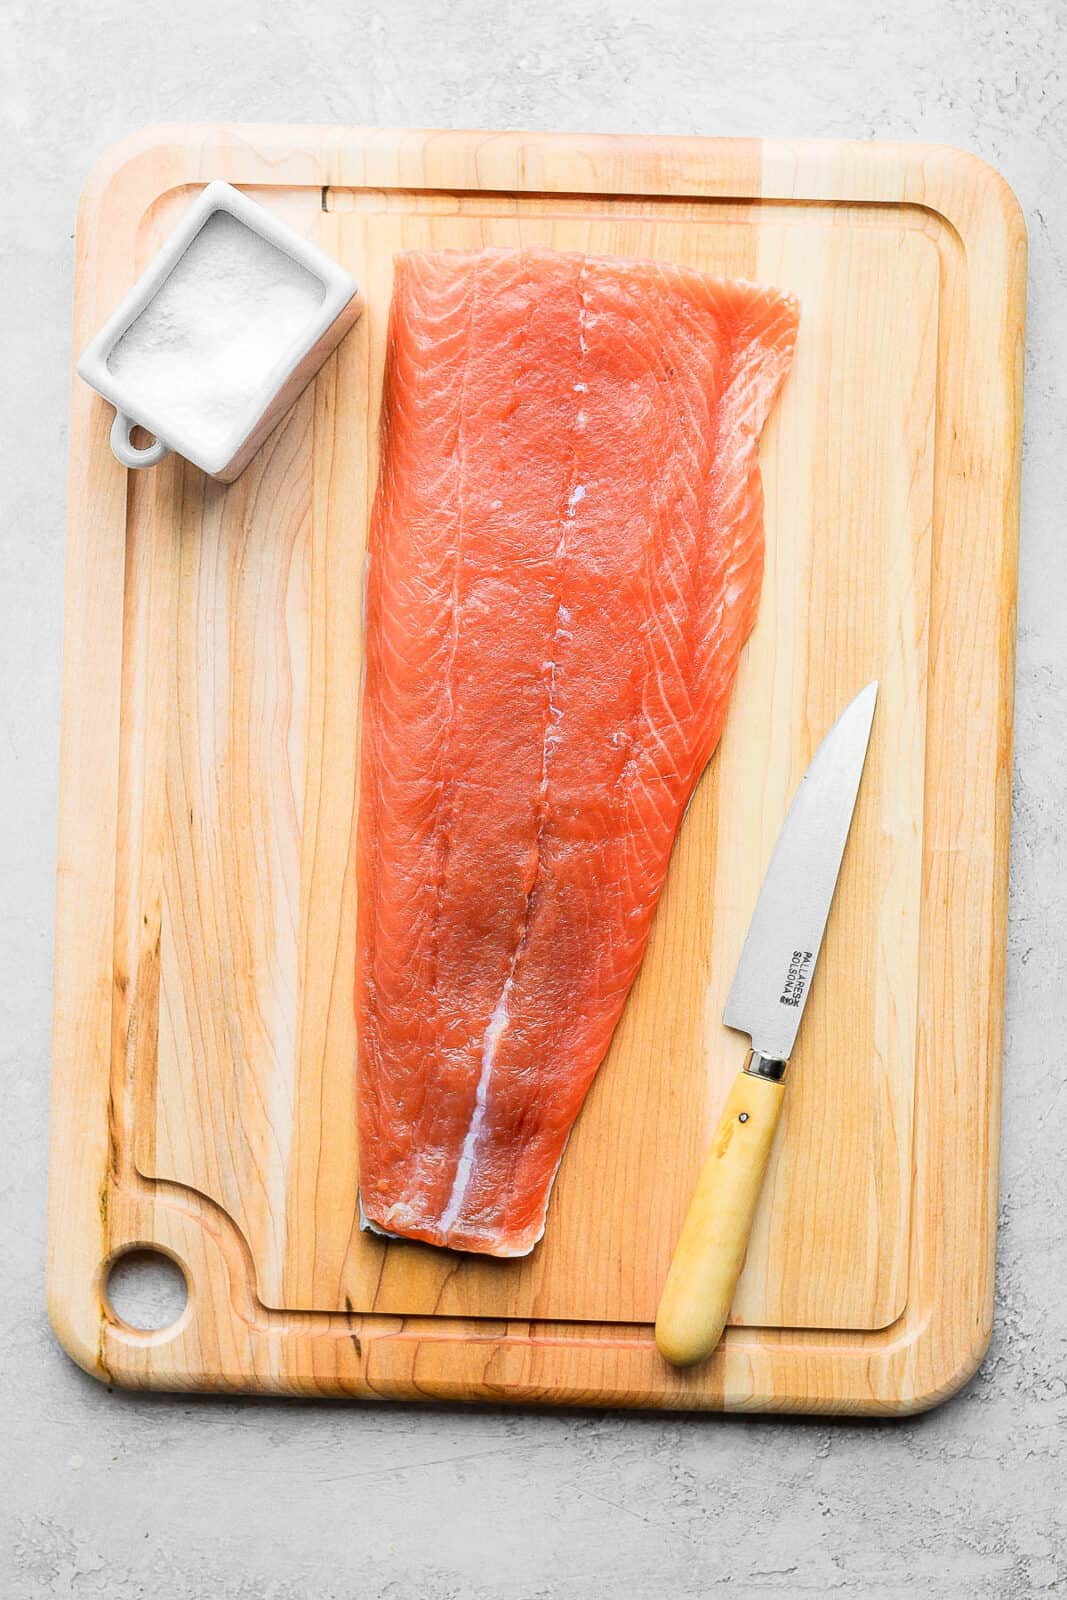 A cutting board with lox, salt, and a knife.